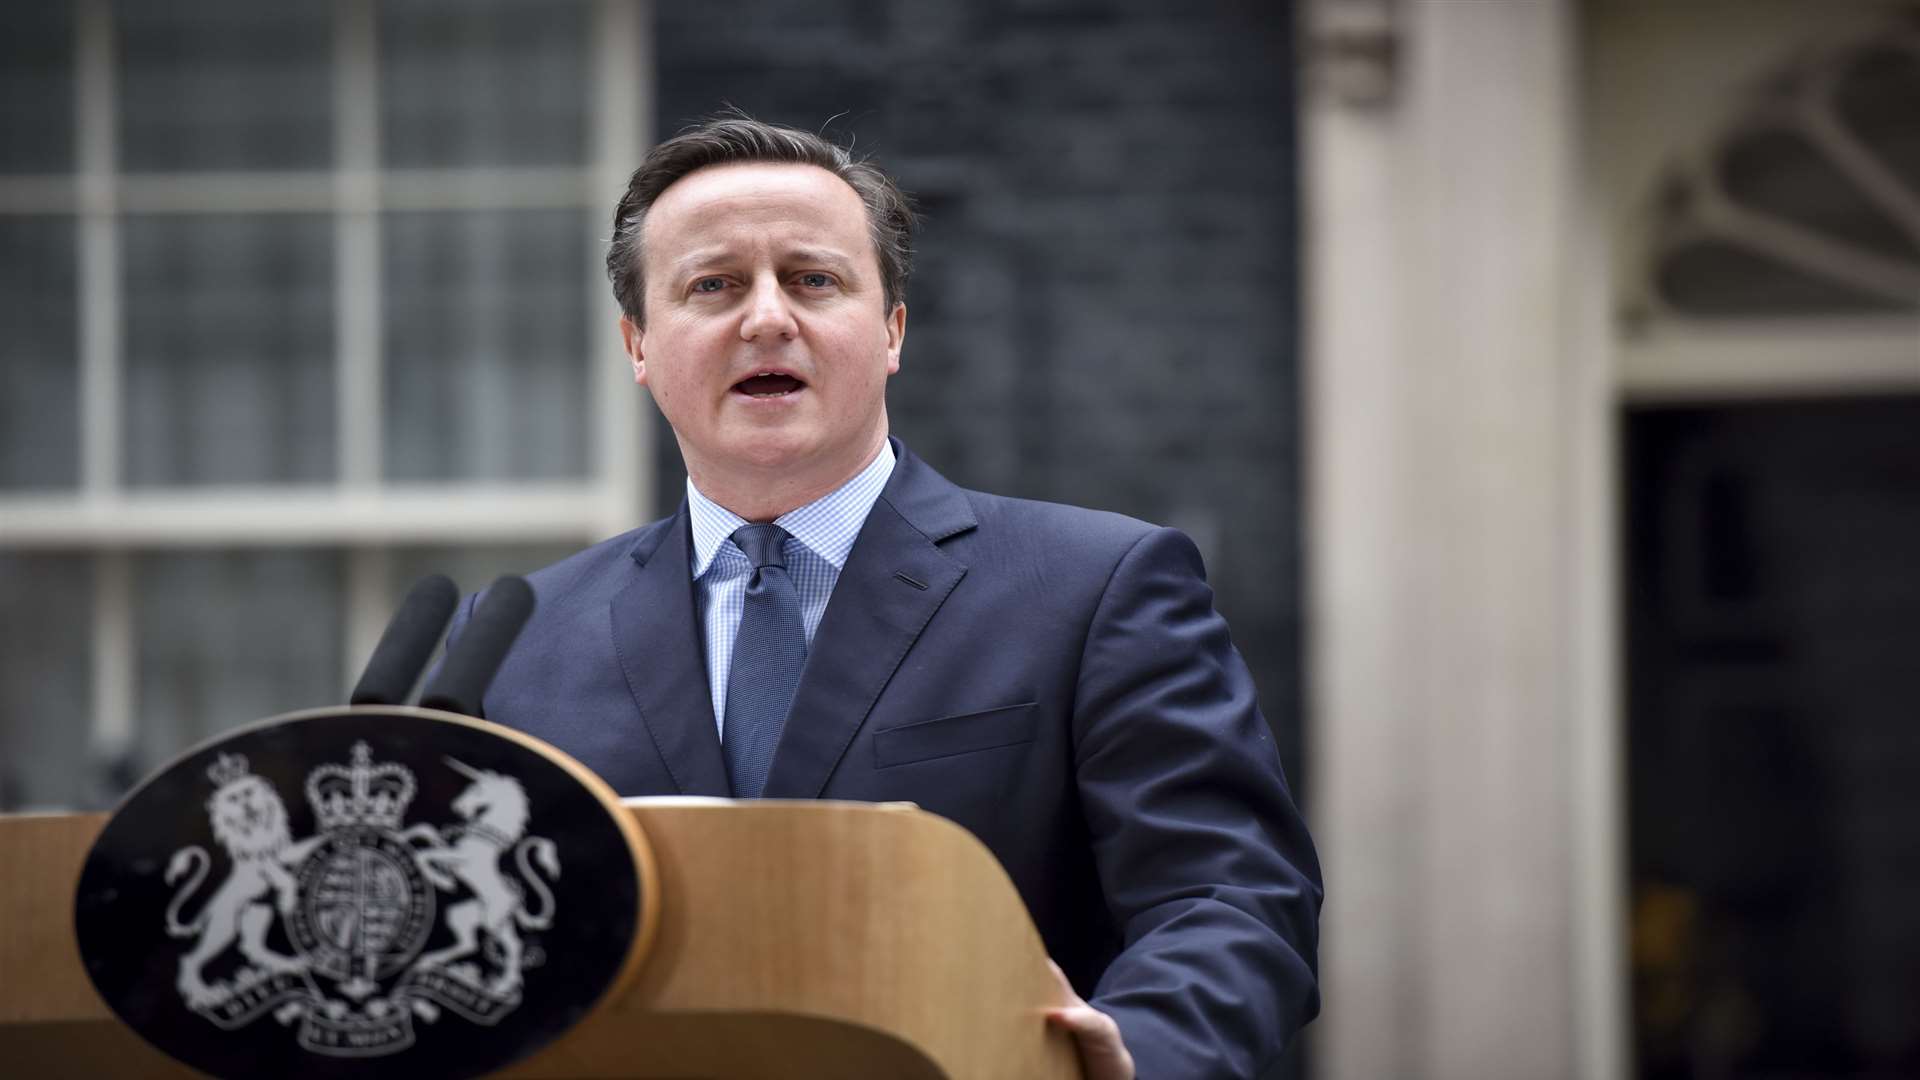 Prime Minster David Cameron has announced his resignation. Picture: The Sun/Ian Whittaker